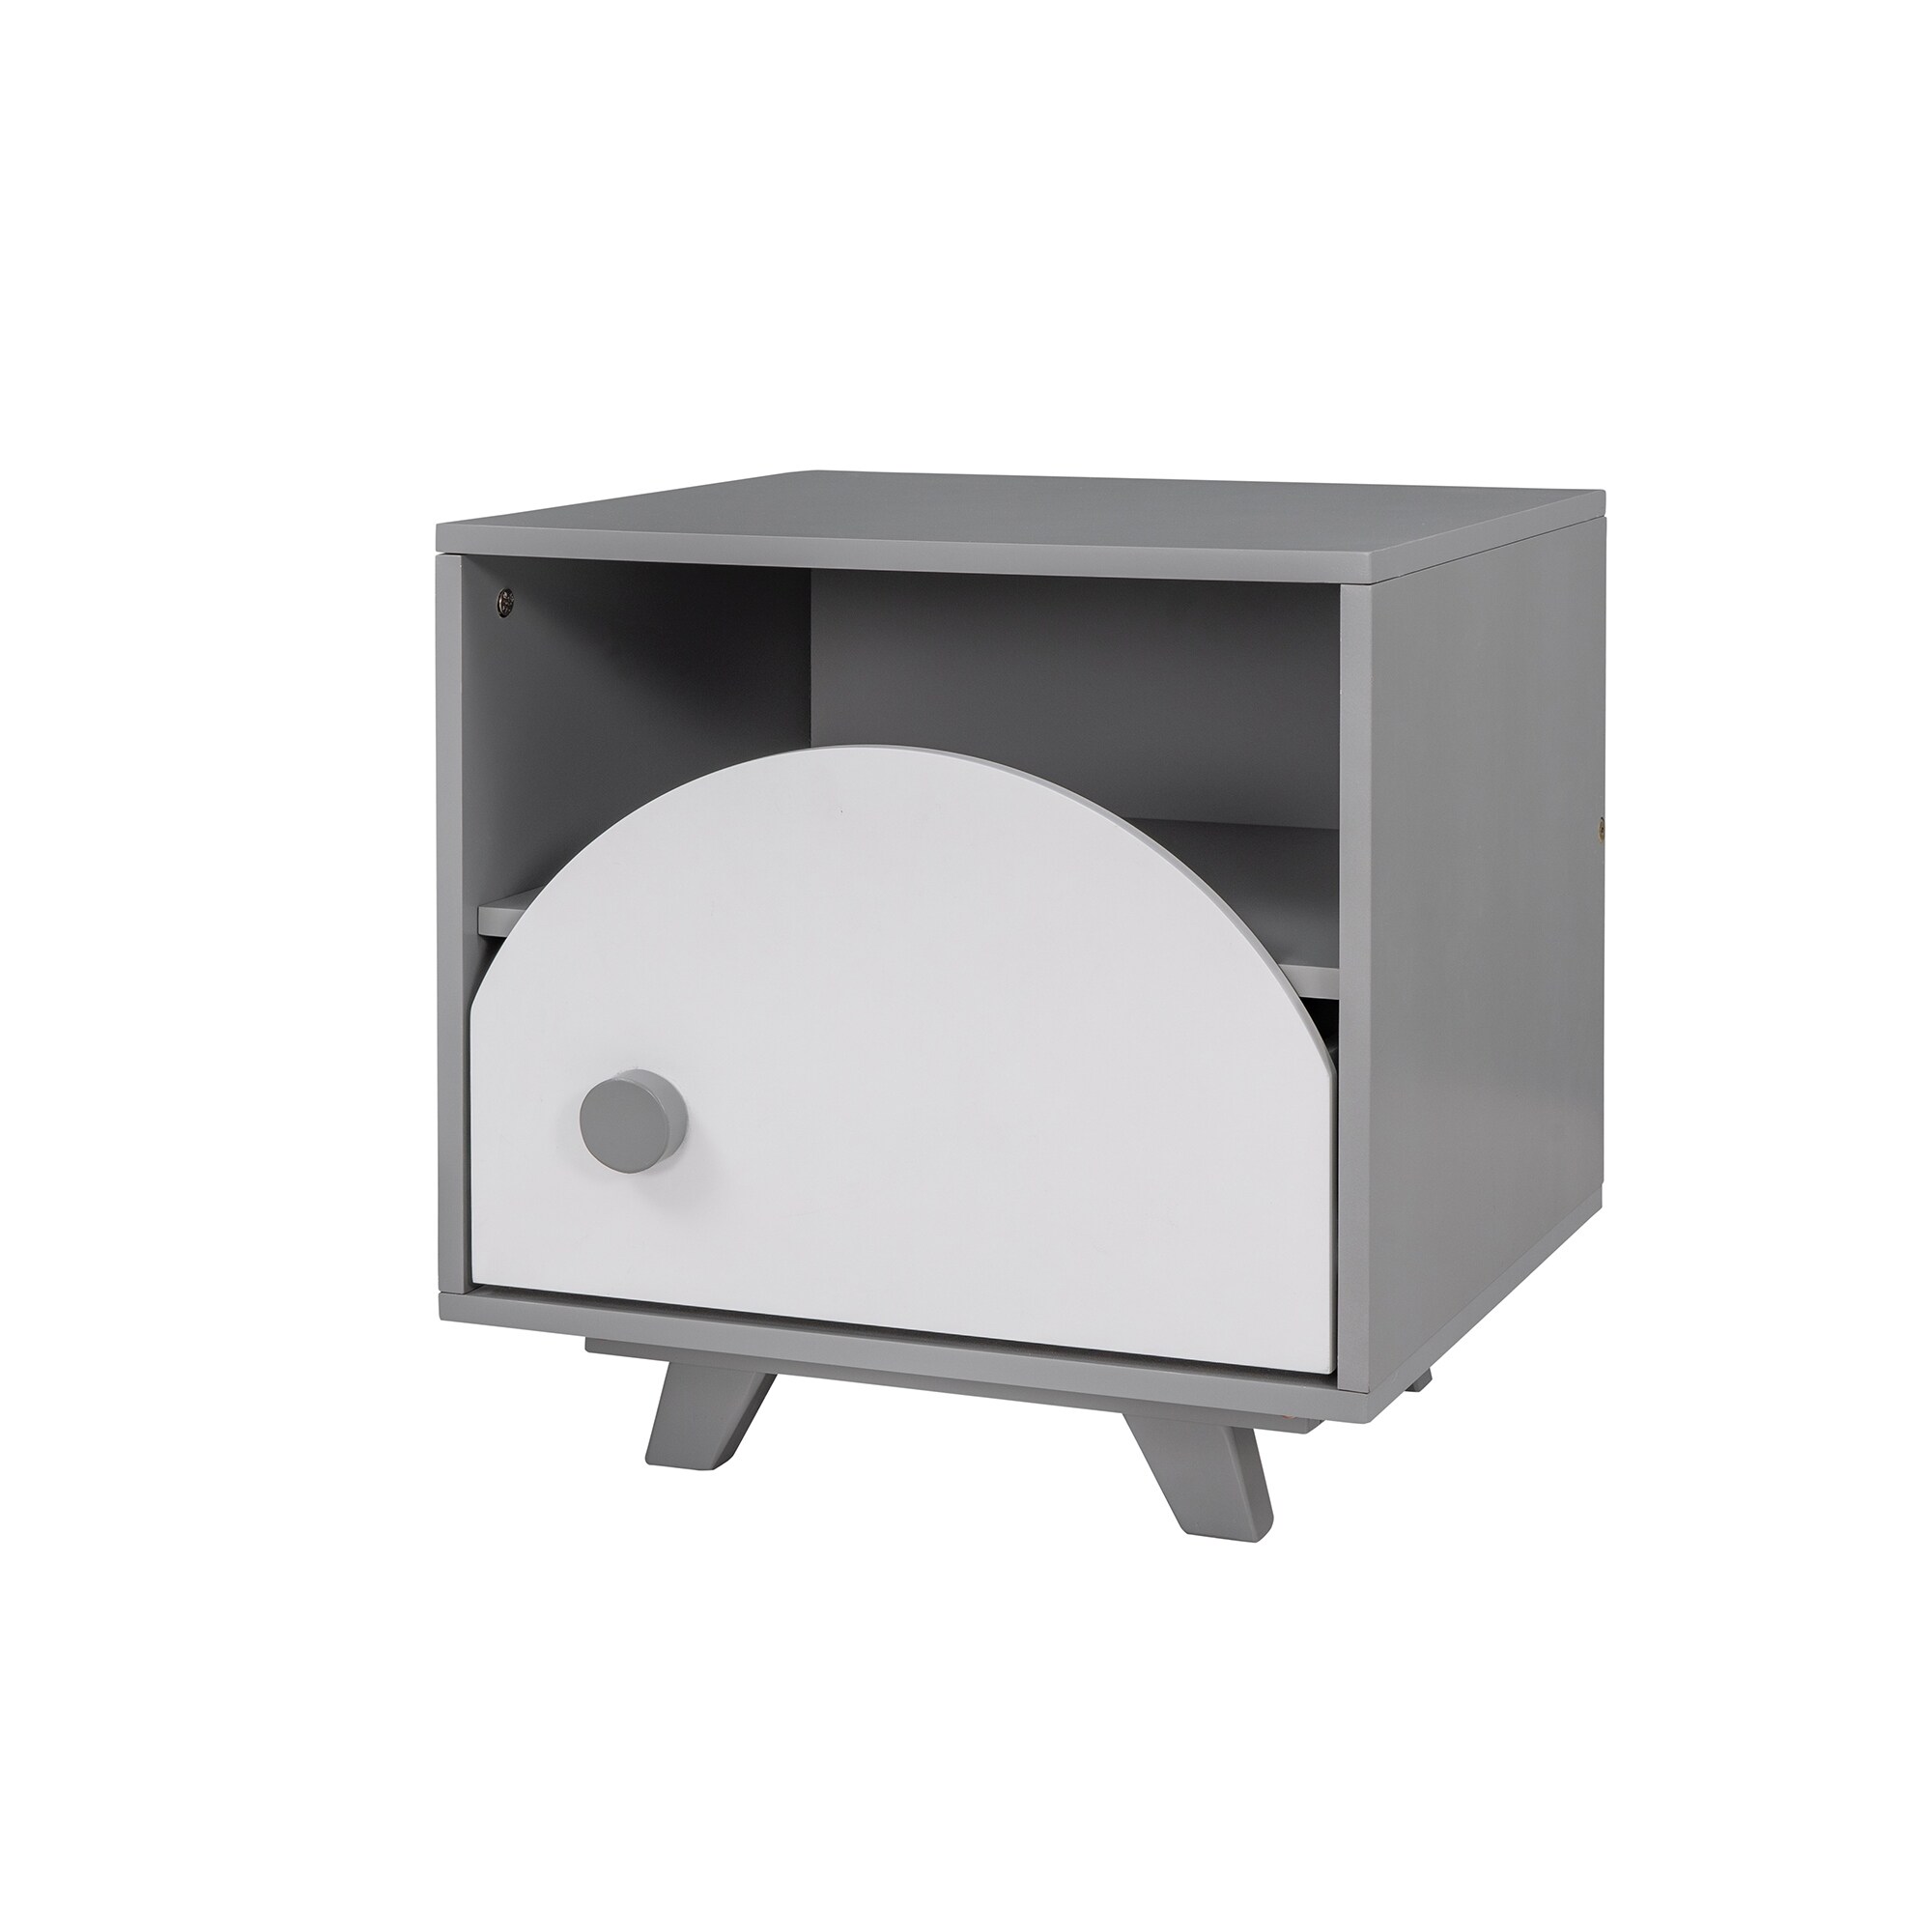 Modern Cute Design Wooden Nightstand with A Drawer and An Open Storage, End Table for Children's Bedroom - White